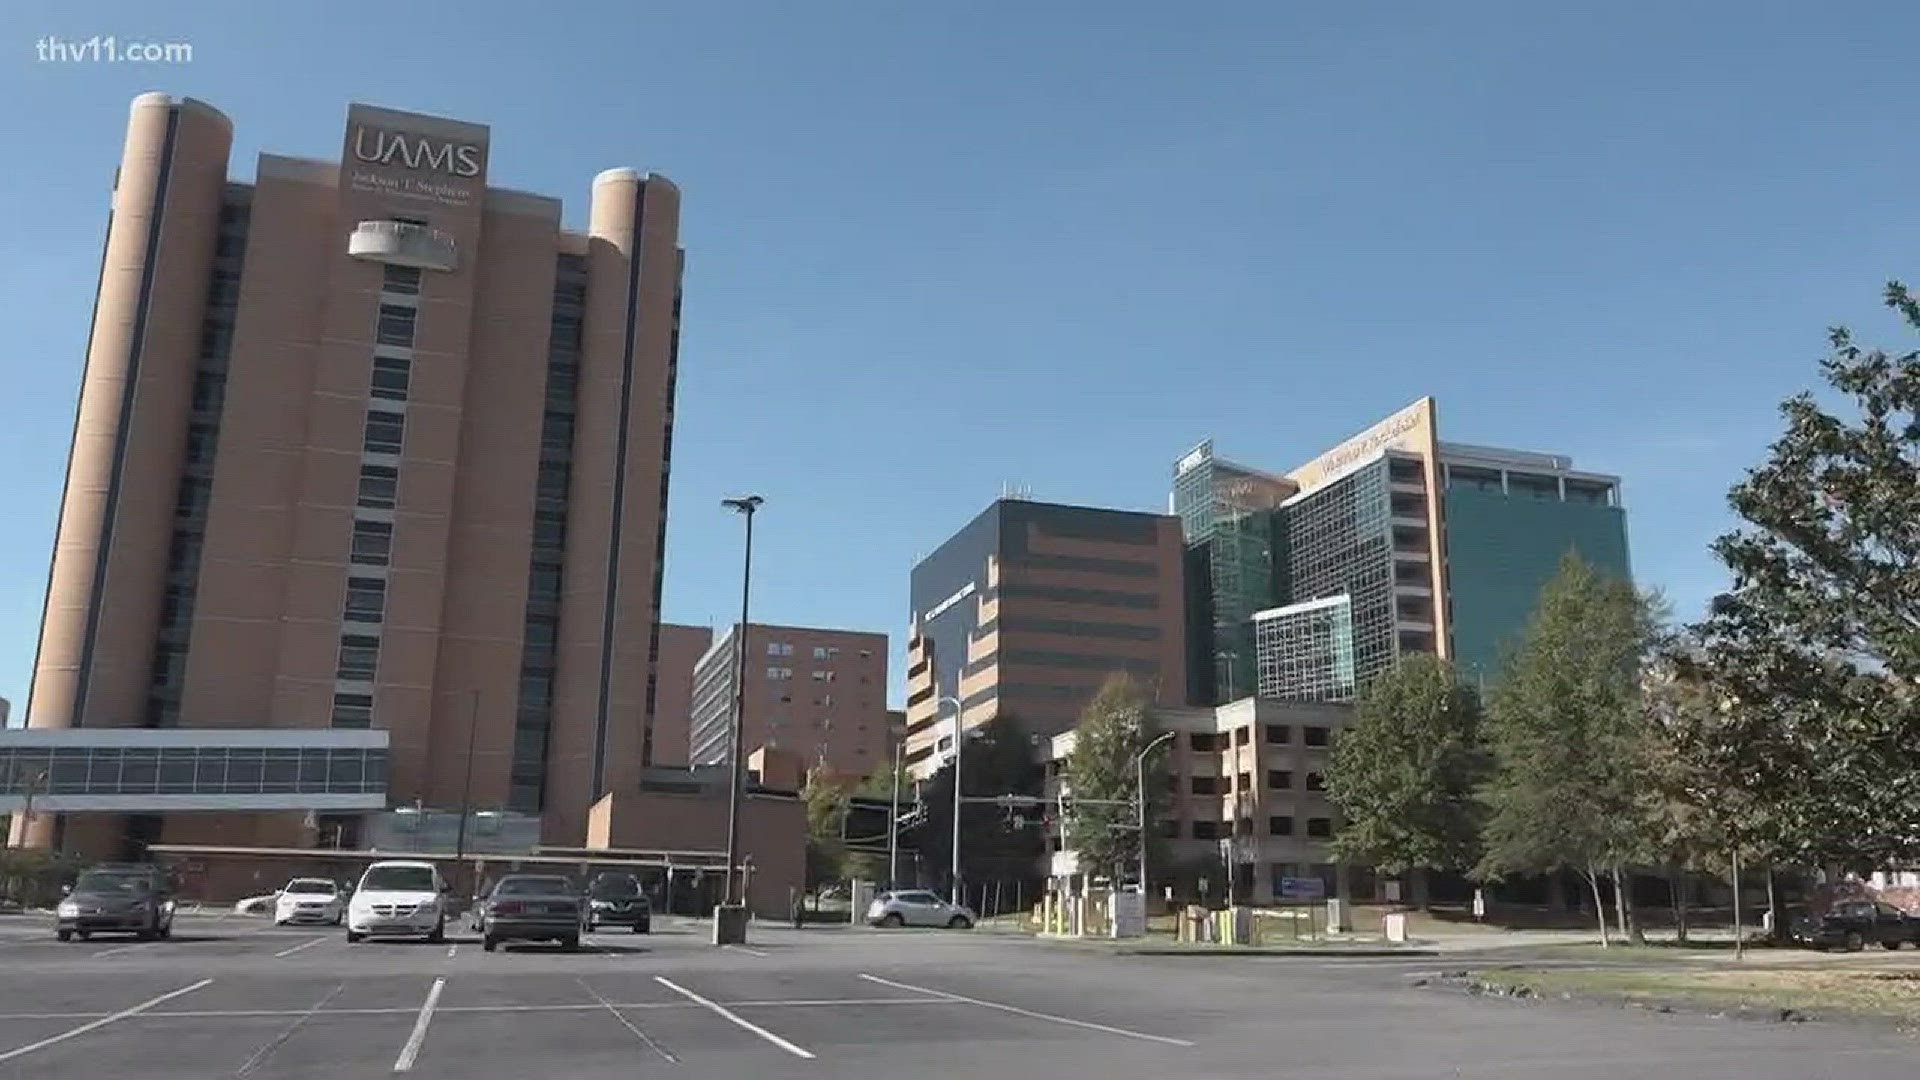 UAMS removes 600  positions after cutting $30M from its fiscal budget. 258 of those positions were occupied.